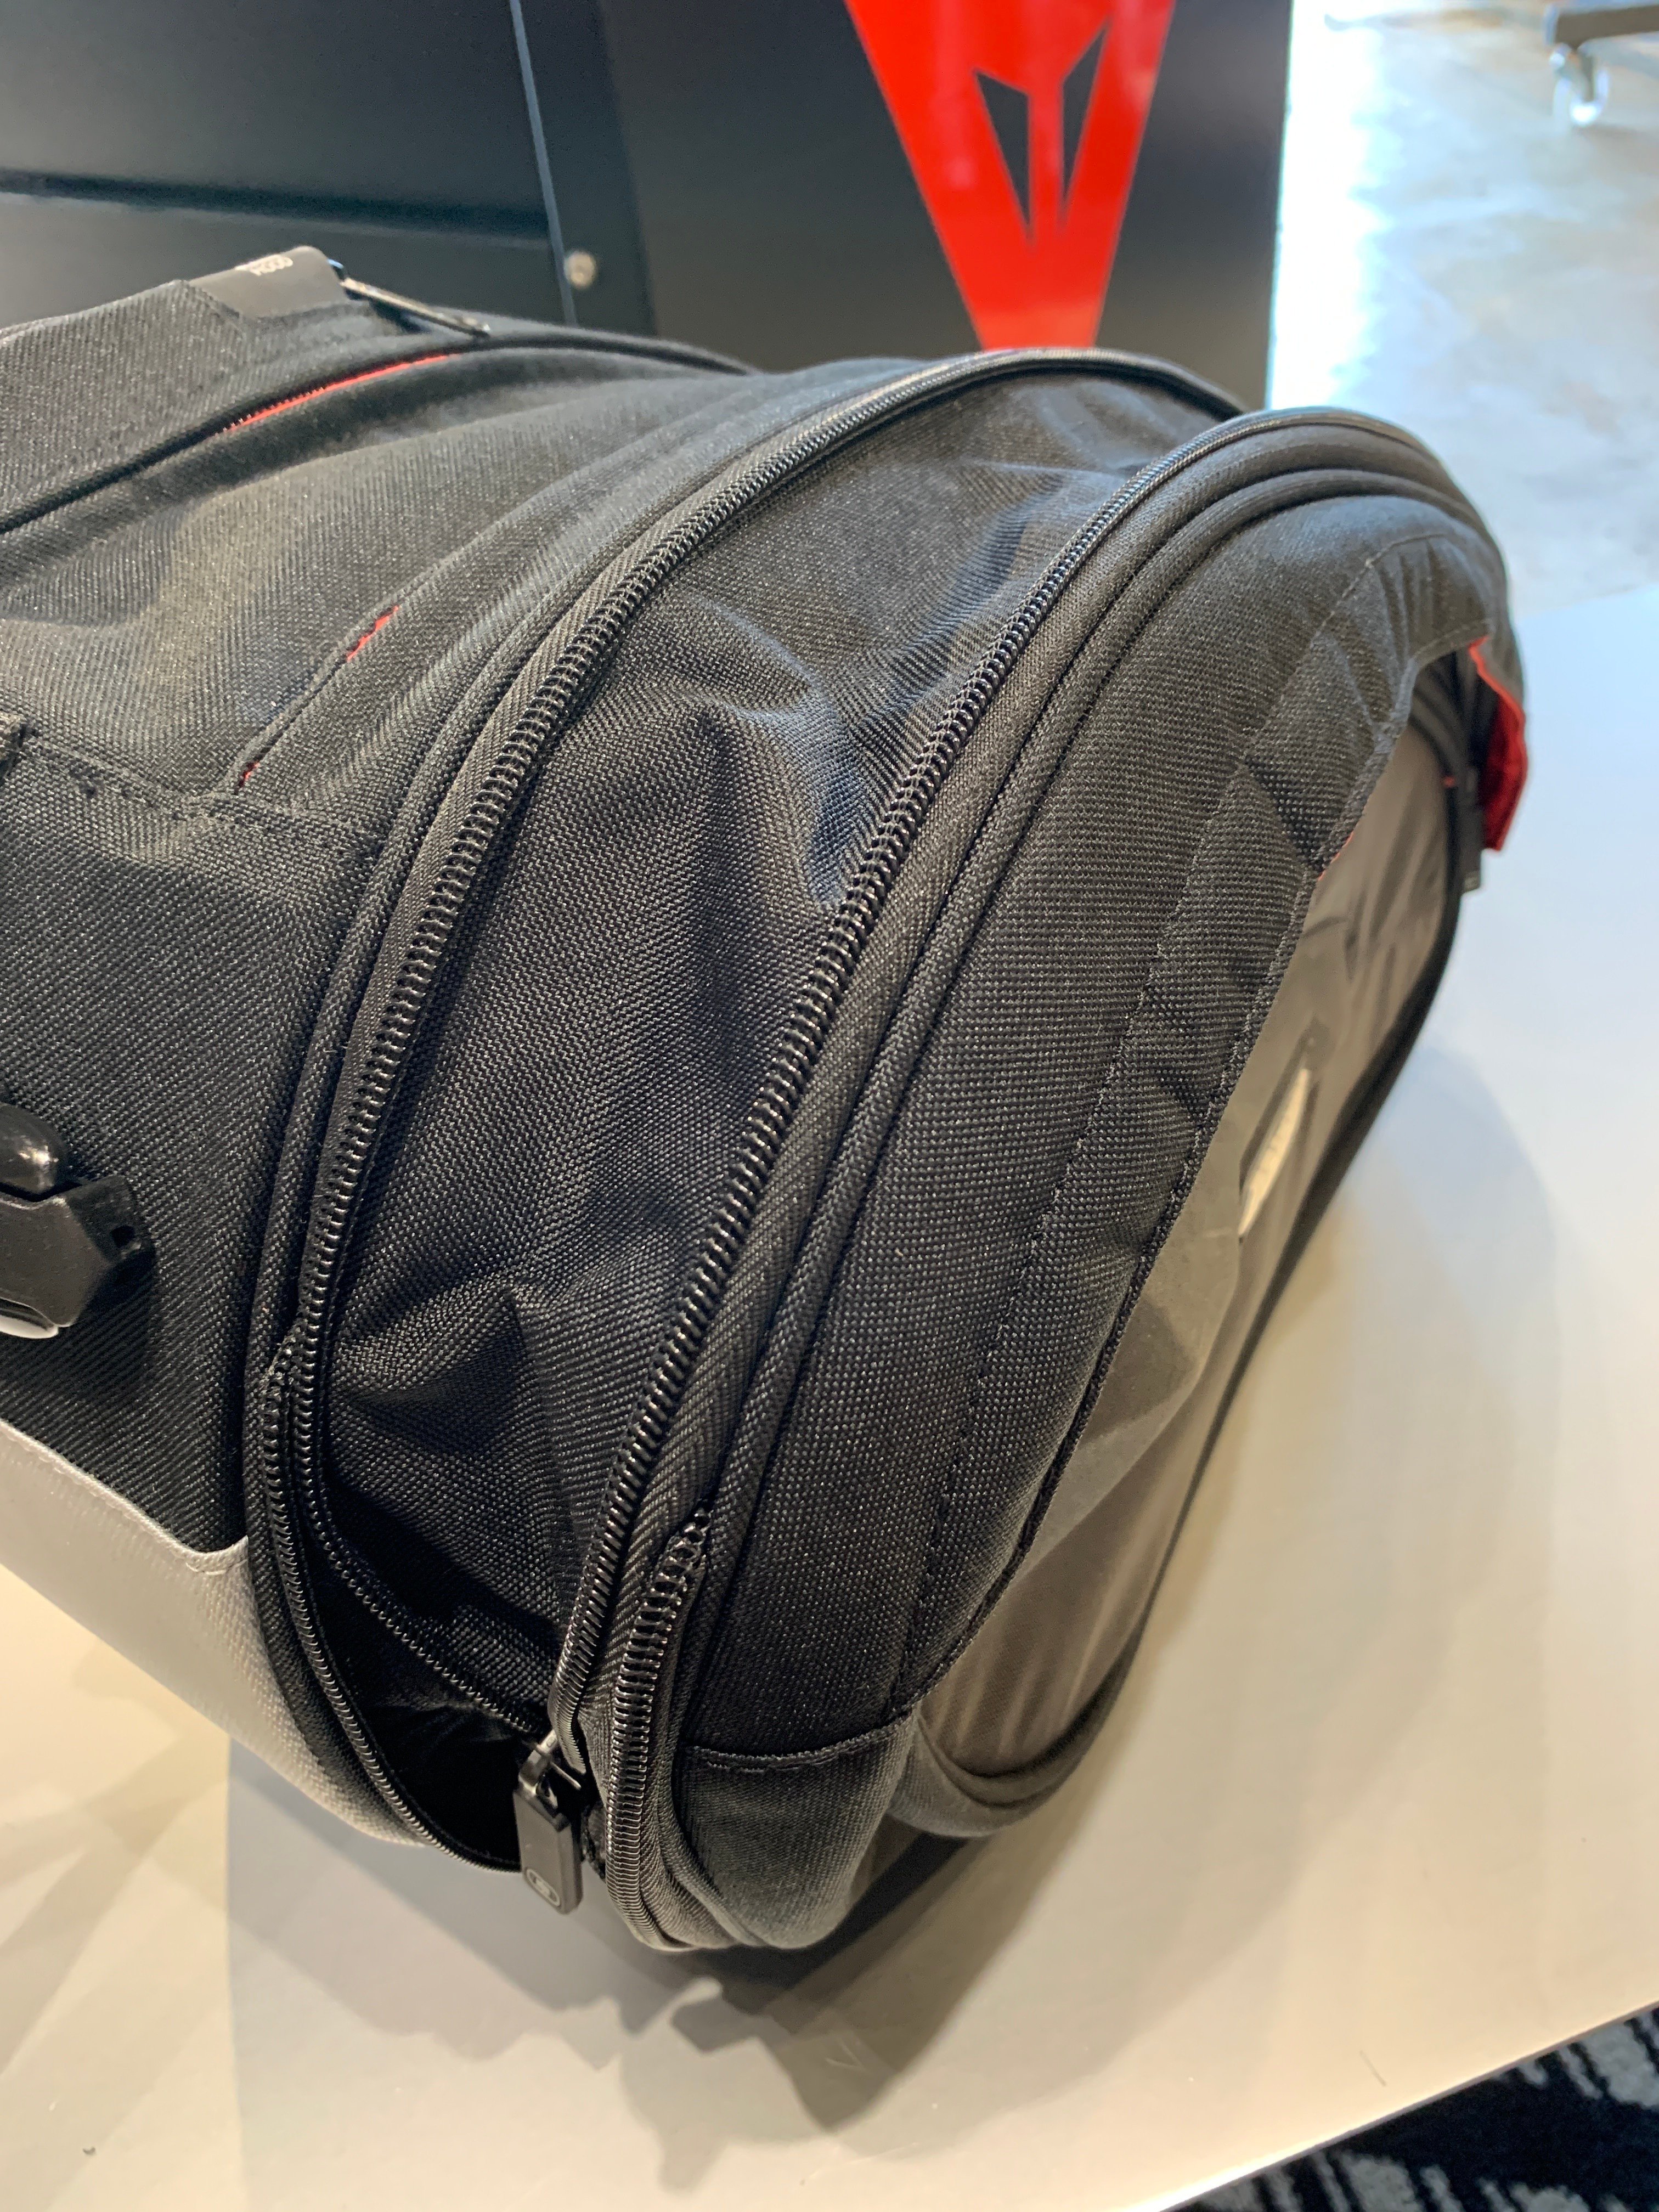 Dainese D-Tail Tail Bag Review at RevZilla.com 